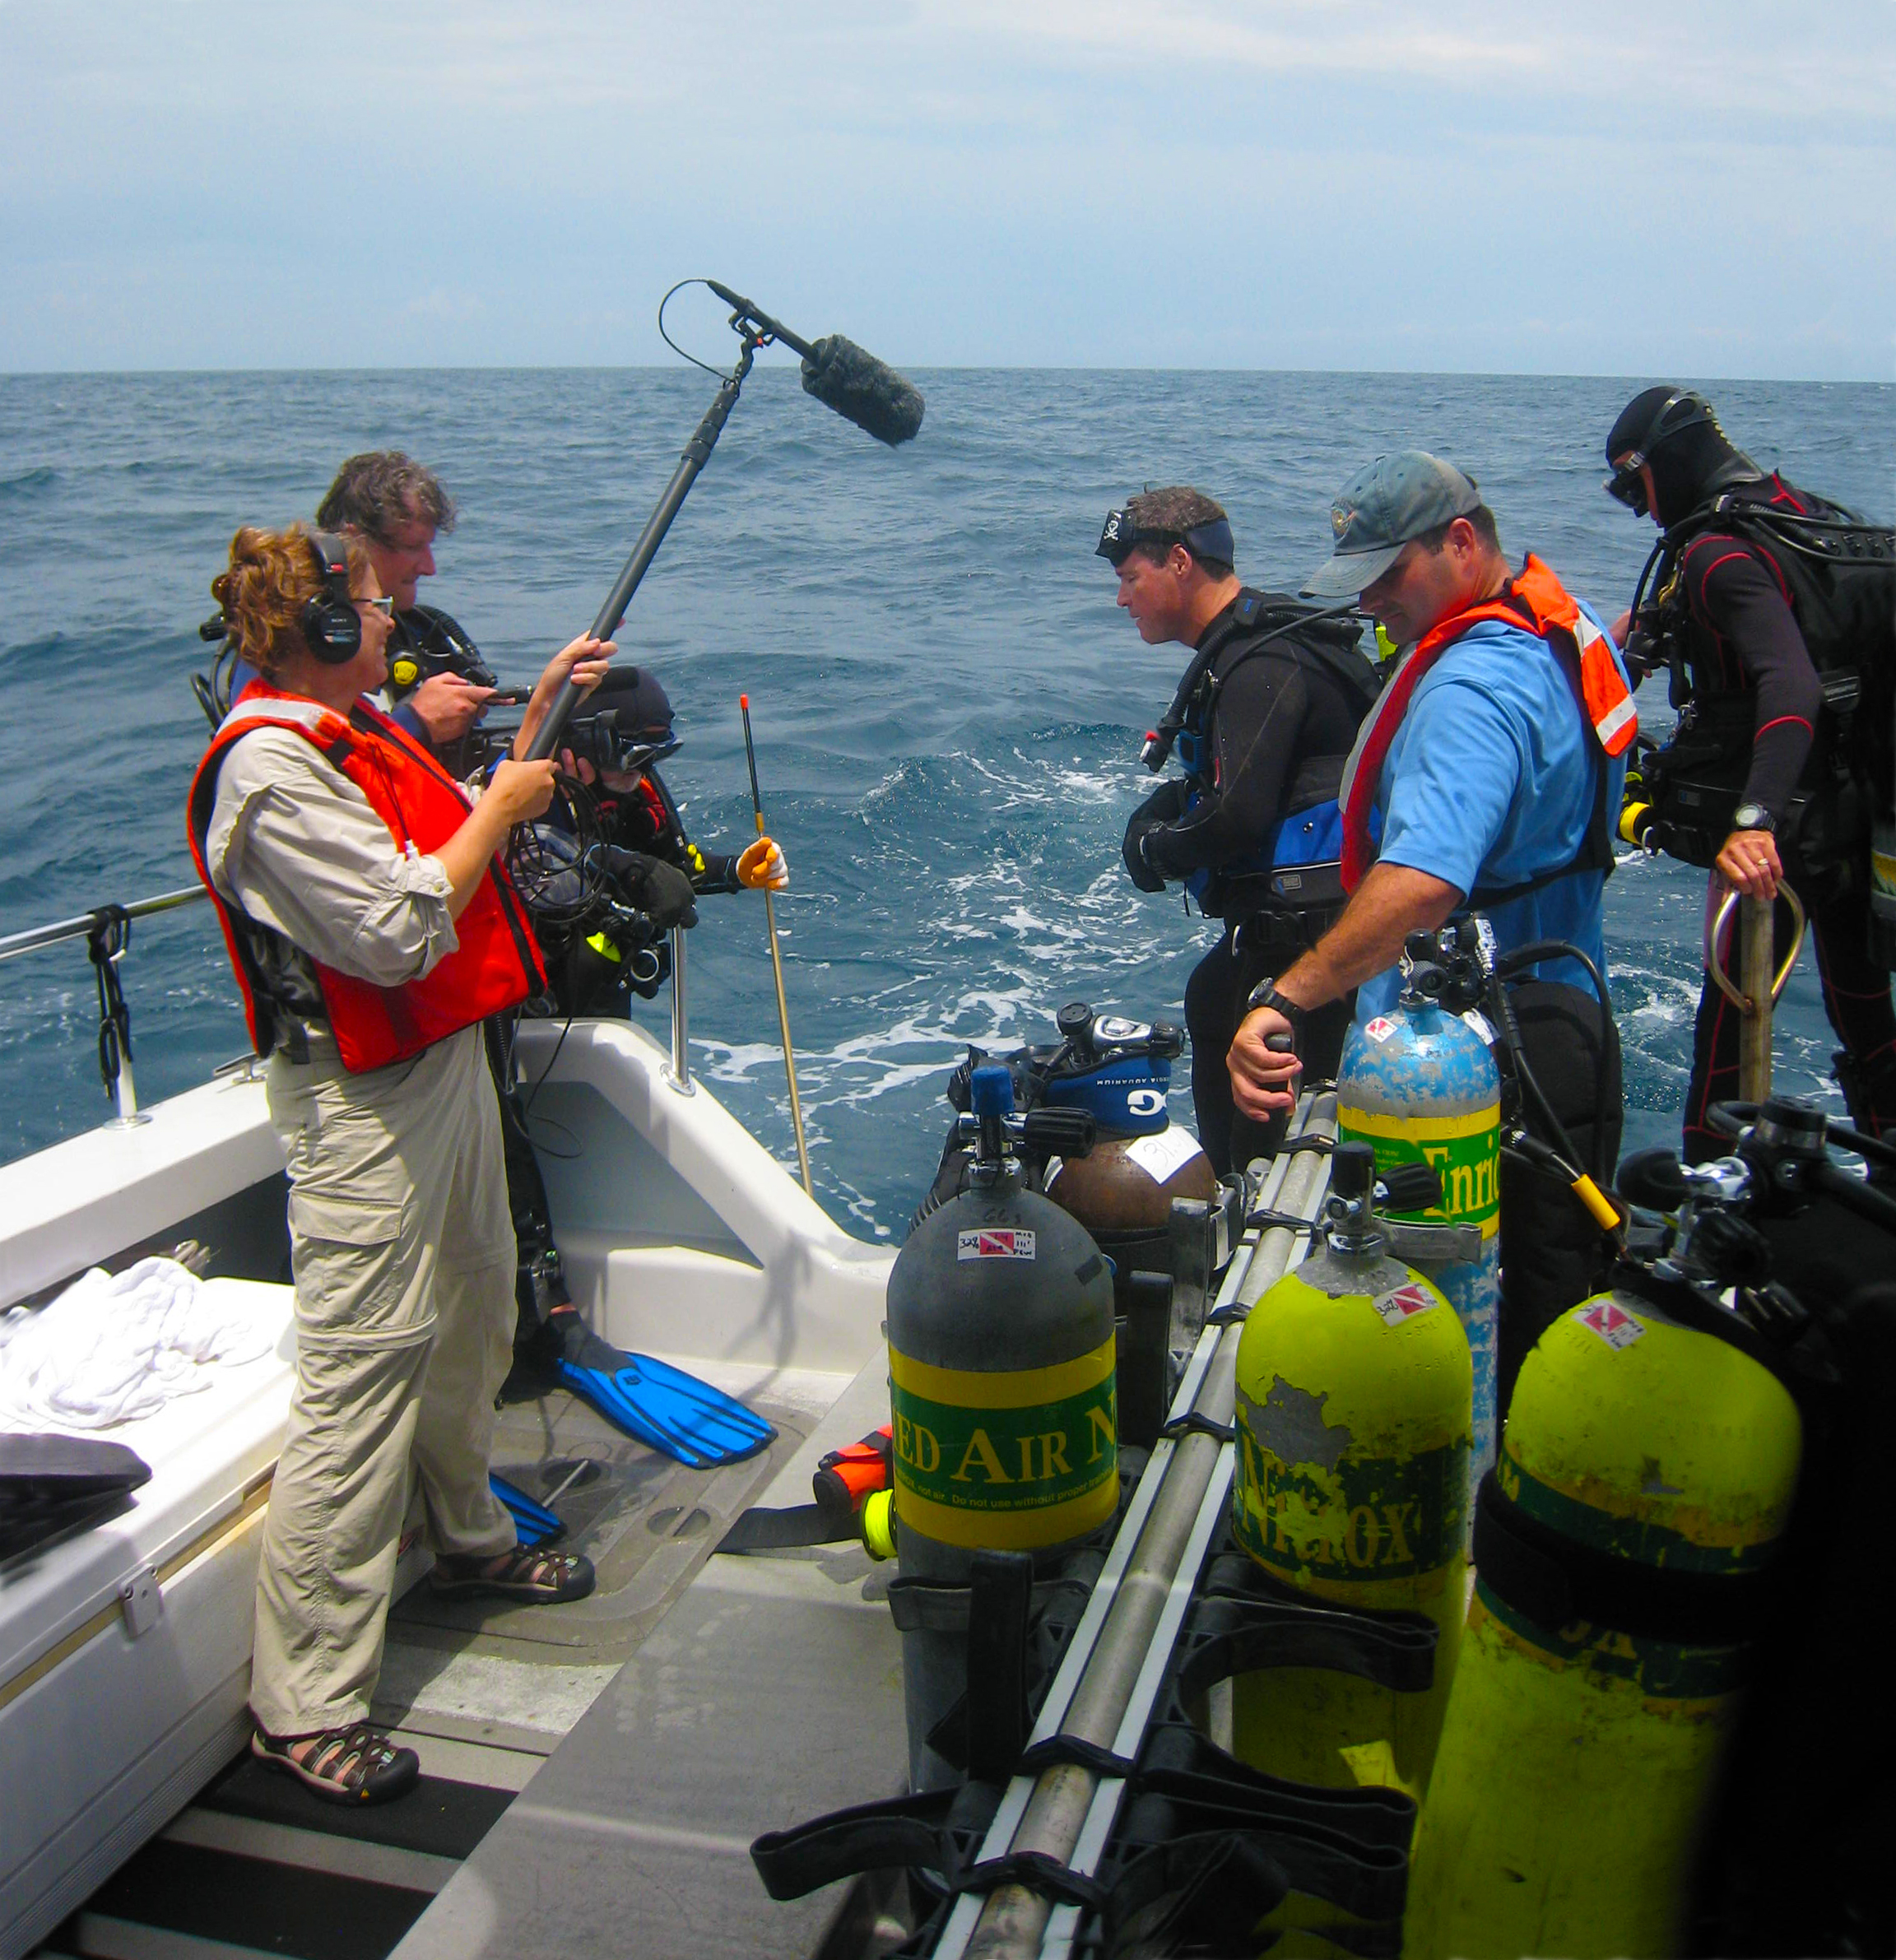 Ocean Mysteries with Jeff Corwin - Nancy Case captures Jeff's audio as he delivers dialogue that sets-up deep dive to look for Lion Fish. (Producer/Director & Cinematographer Rob Case in background)